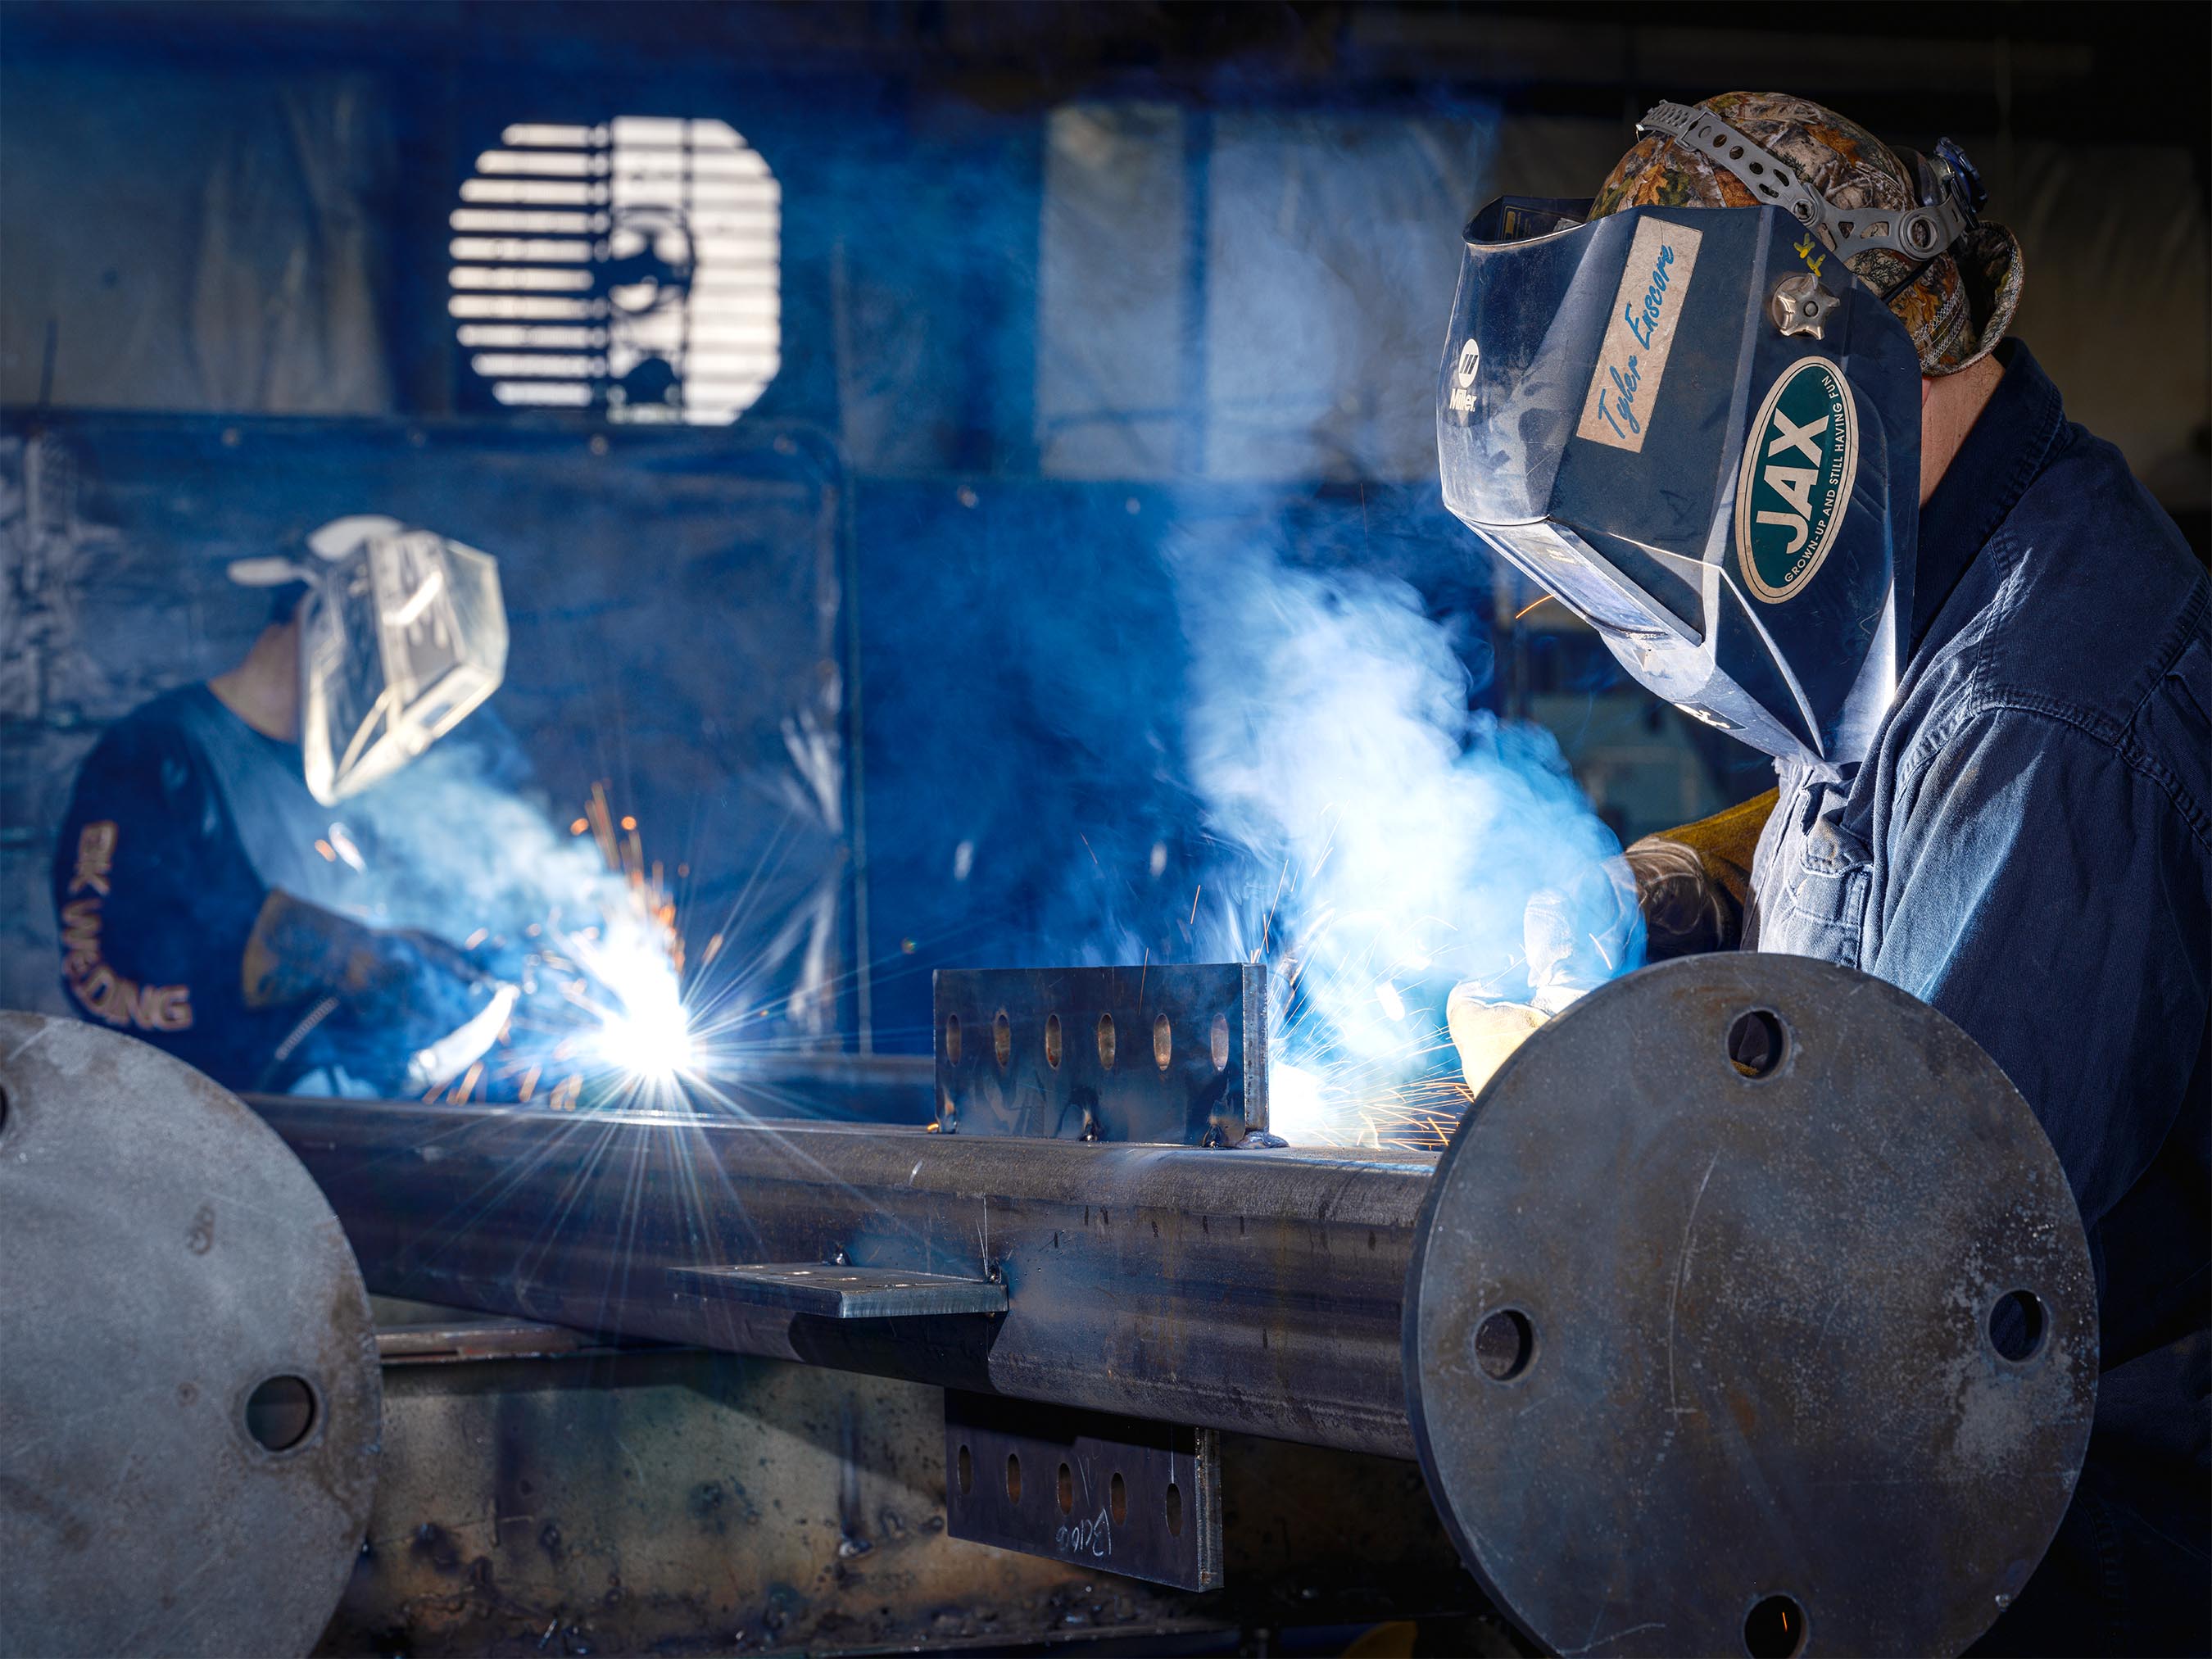 Construction photography by Warren Diggles. Steelworkers fabricating a project at BK Welding shop in Loveland, Colorado.